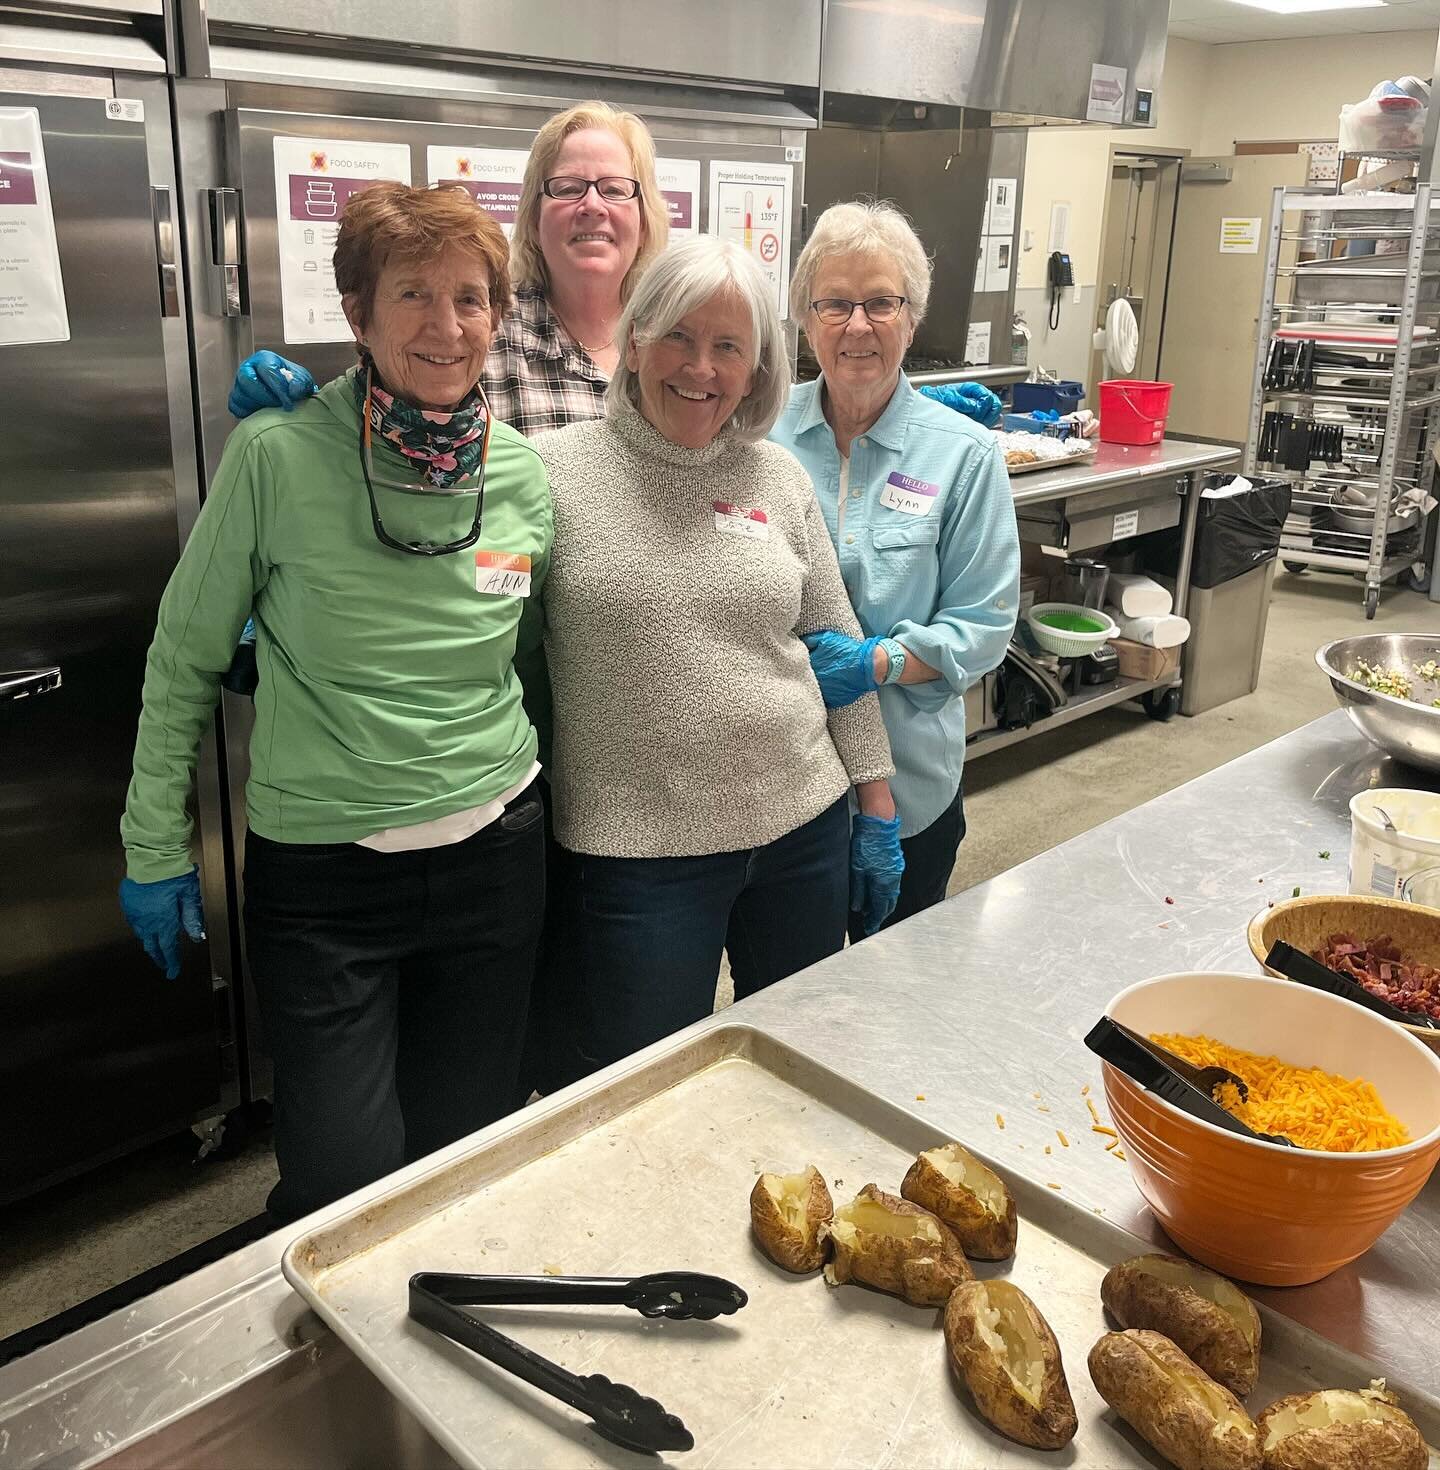 Thank you to singers from @denverwomenschorus for serving a tasty baked potato bar to our guests tonight! We love our volunteers!